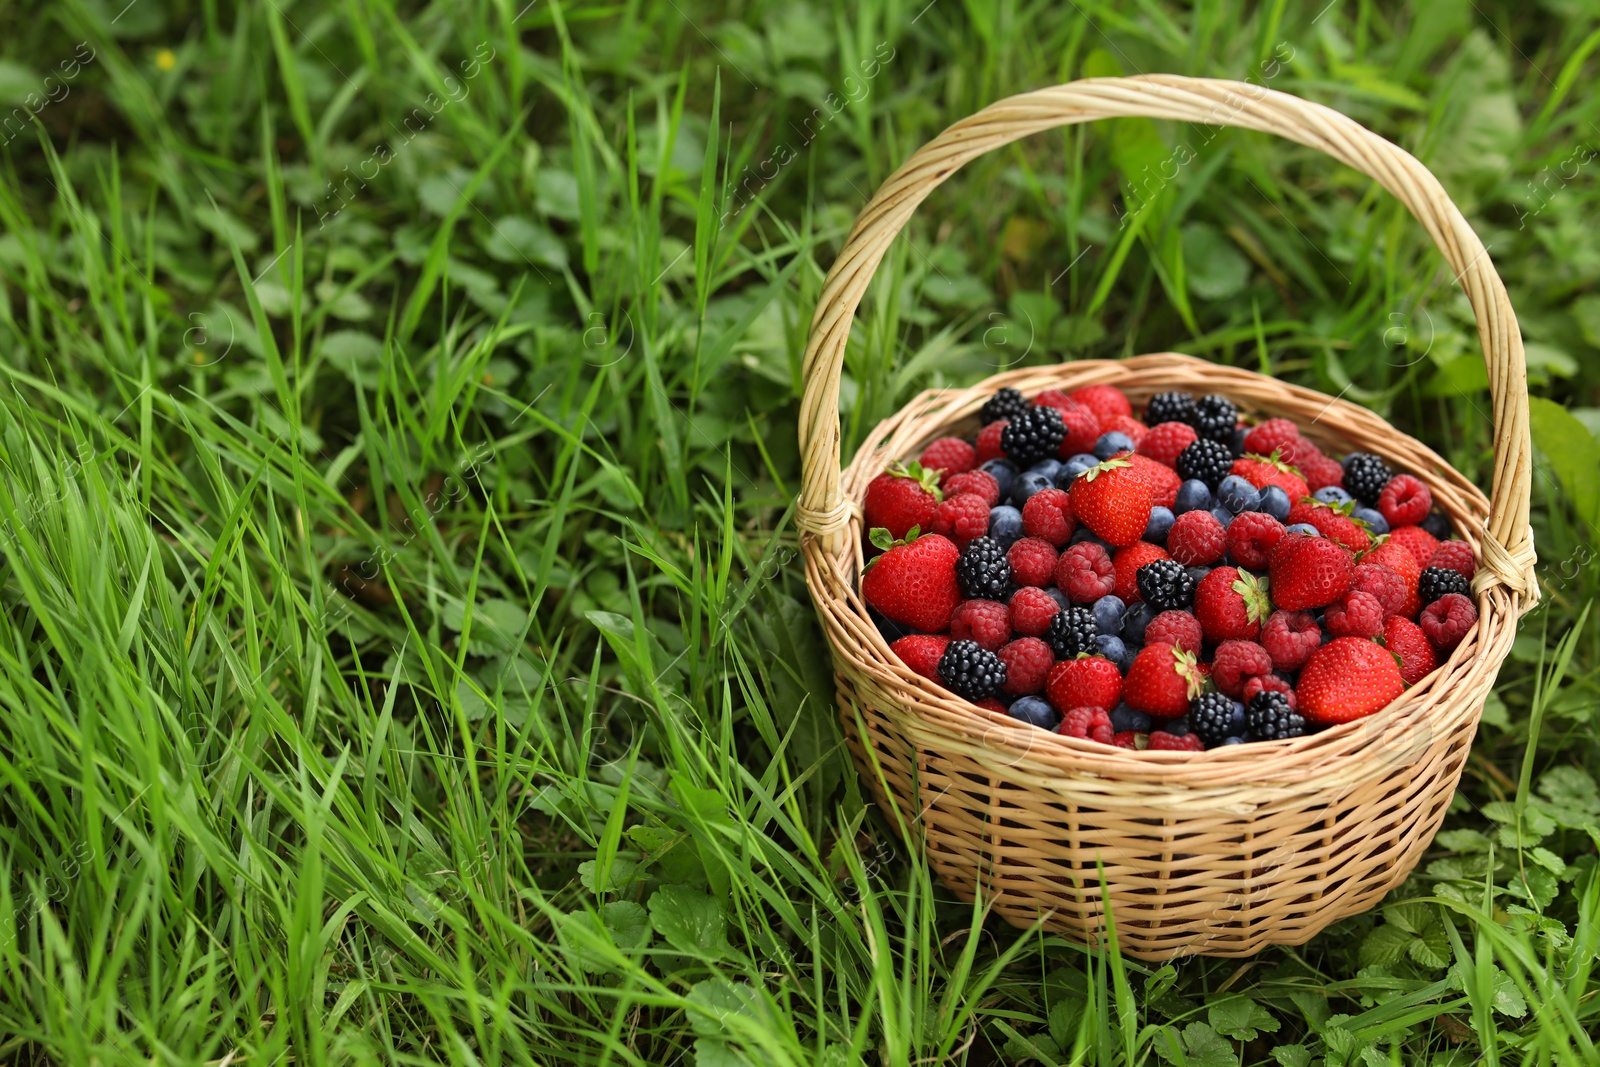 Photo of Wicker basket with different fresh ripe berries in green grass outdoors, space for text